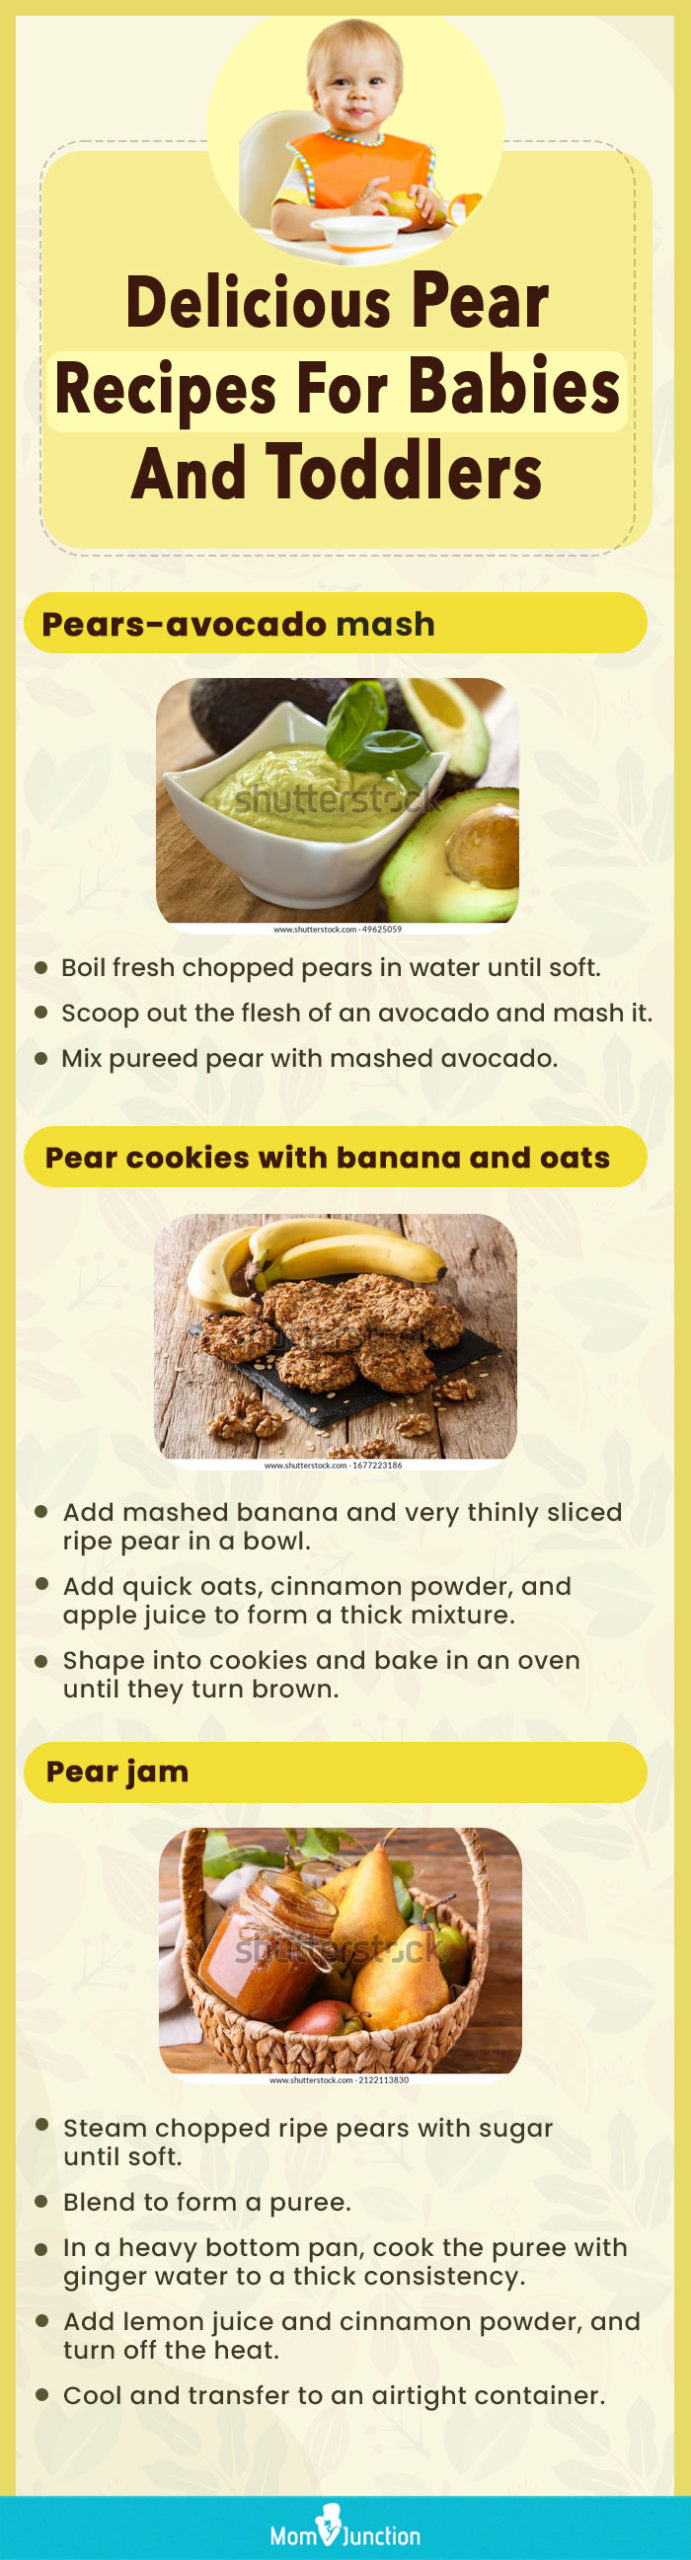 delicious pear recipes for babies and toddlers [infographic]